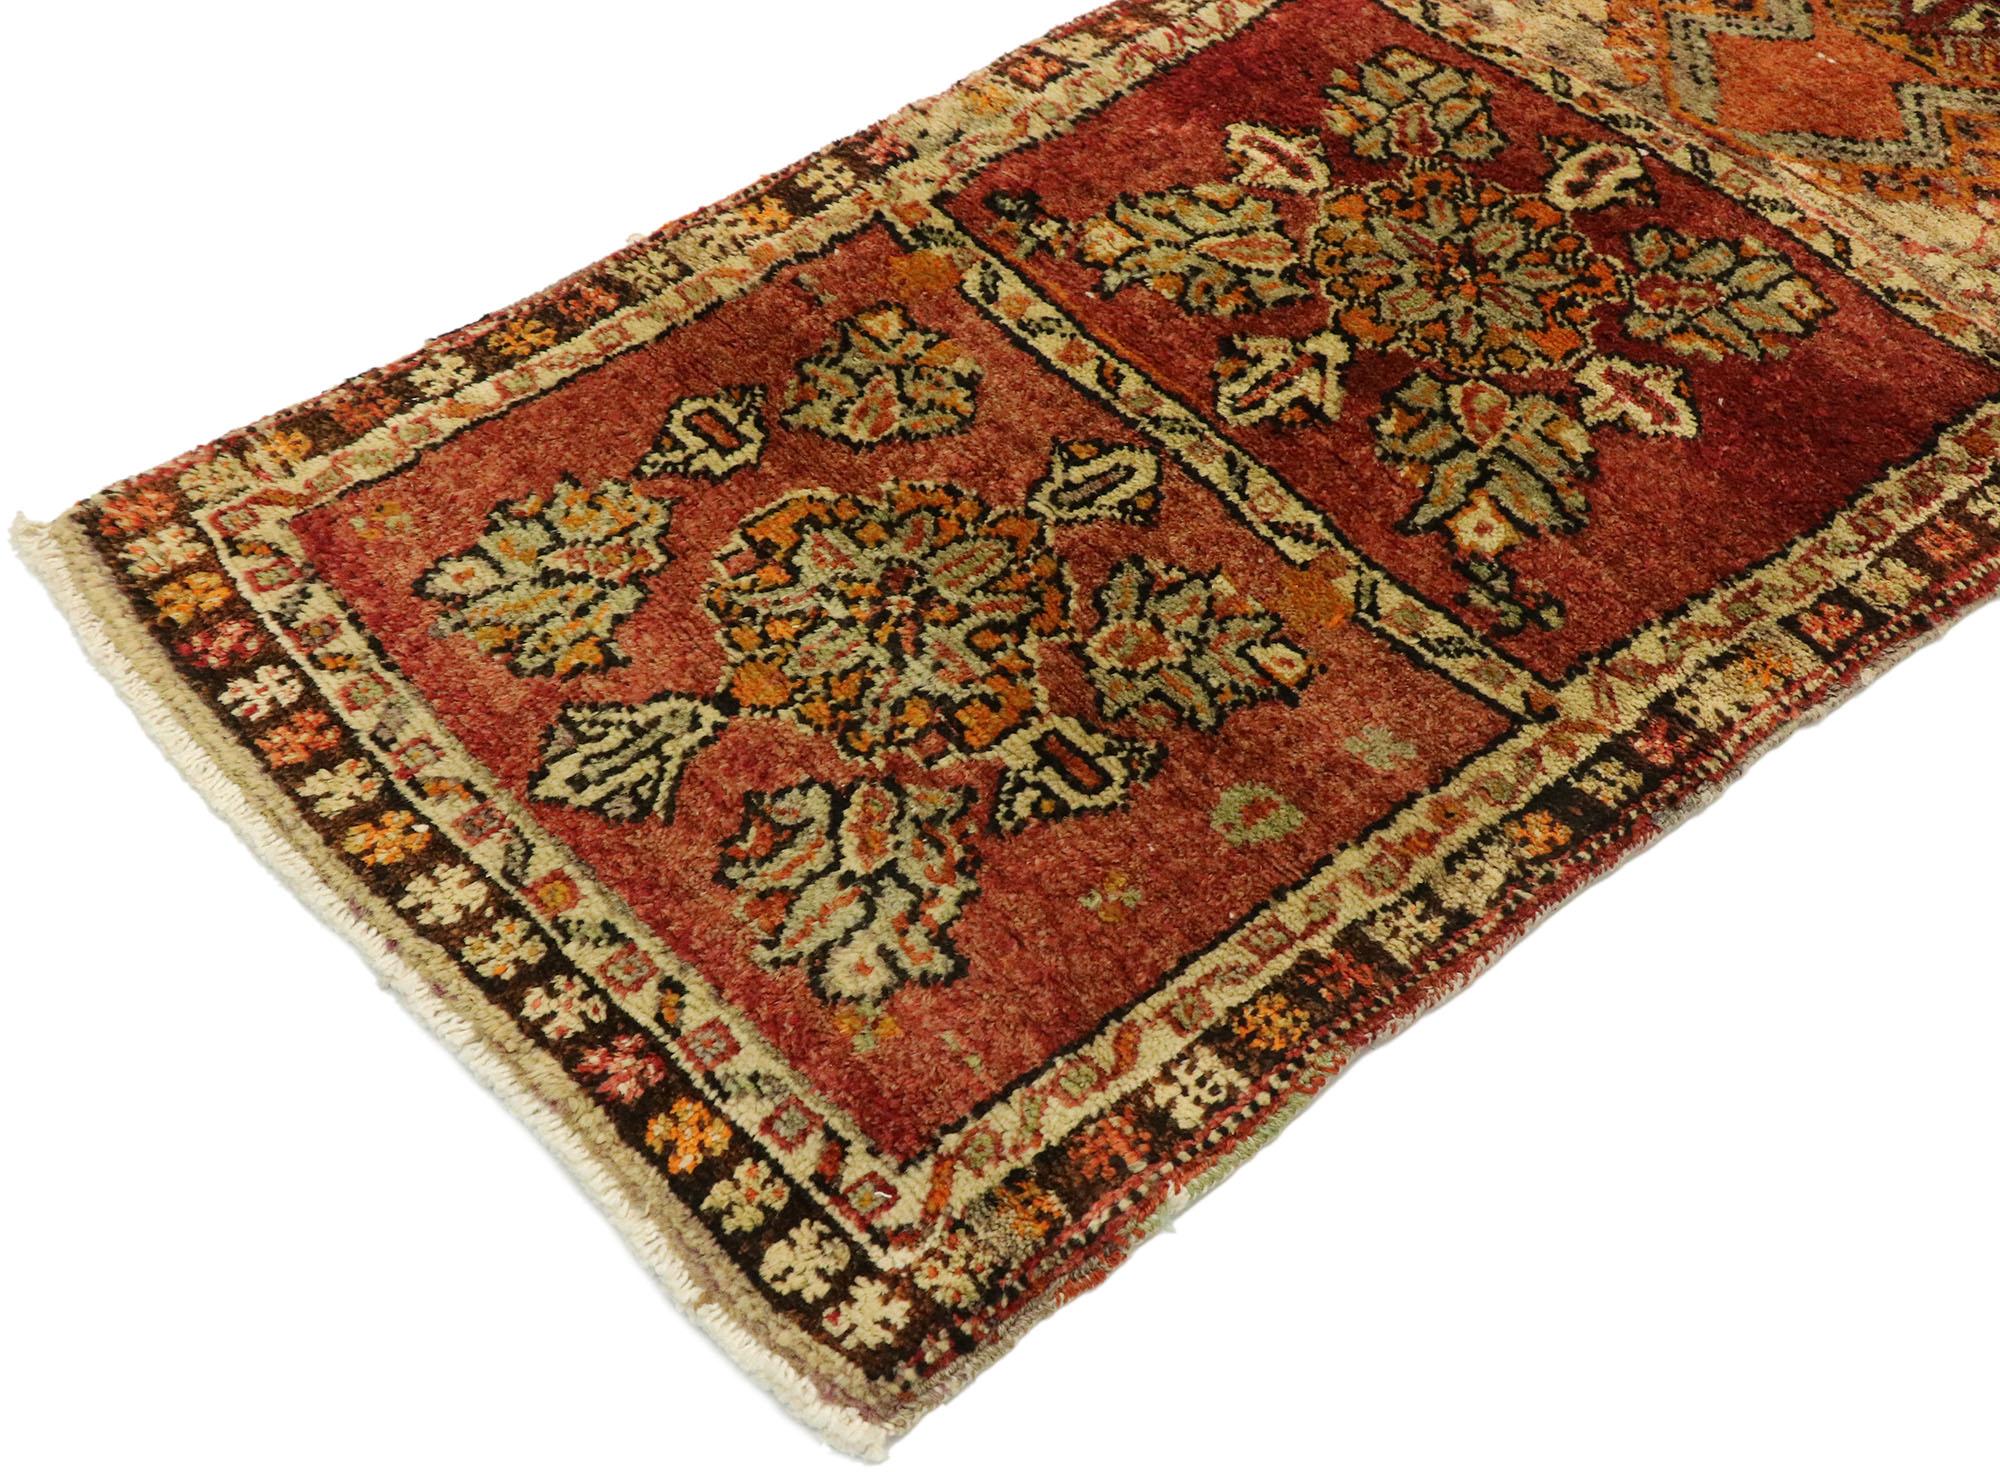 53095, vintage Turkish Oushak runner with Rustic Arts & Crafts style. The architectural elements of naturalistic forms combined with Arts & Crafts style, this hand knotted wool vintage Turkish Oushak astounds with its beauty. The rich abrash and